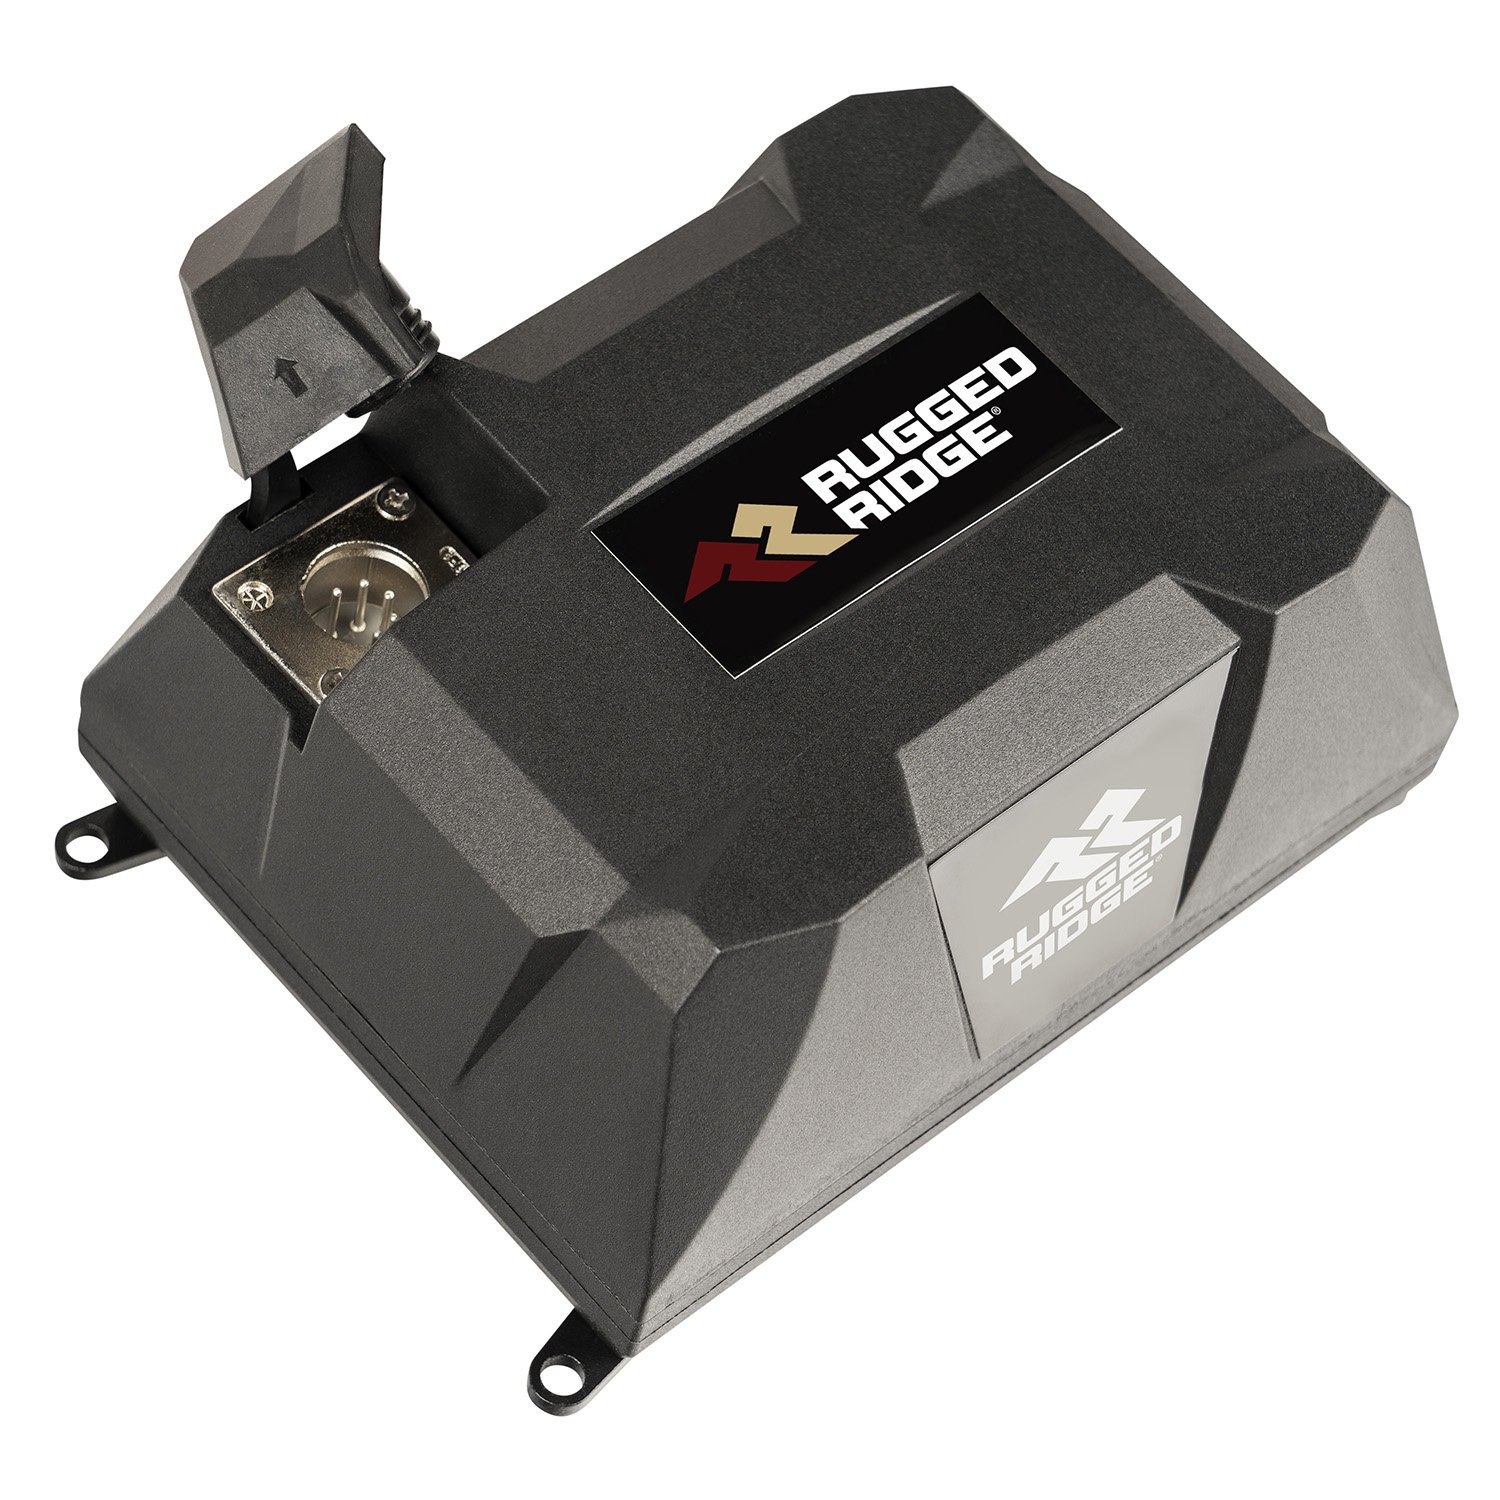 Rugged Ridge 15103.38 Solenoid Box with Wires for Trekker Winch | Quadratec